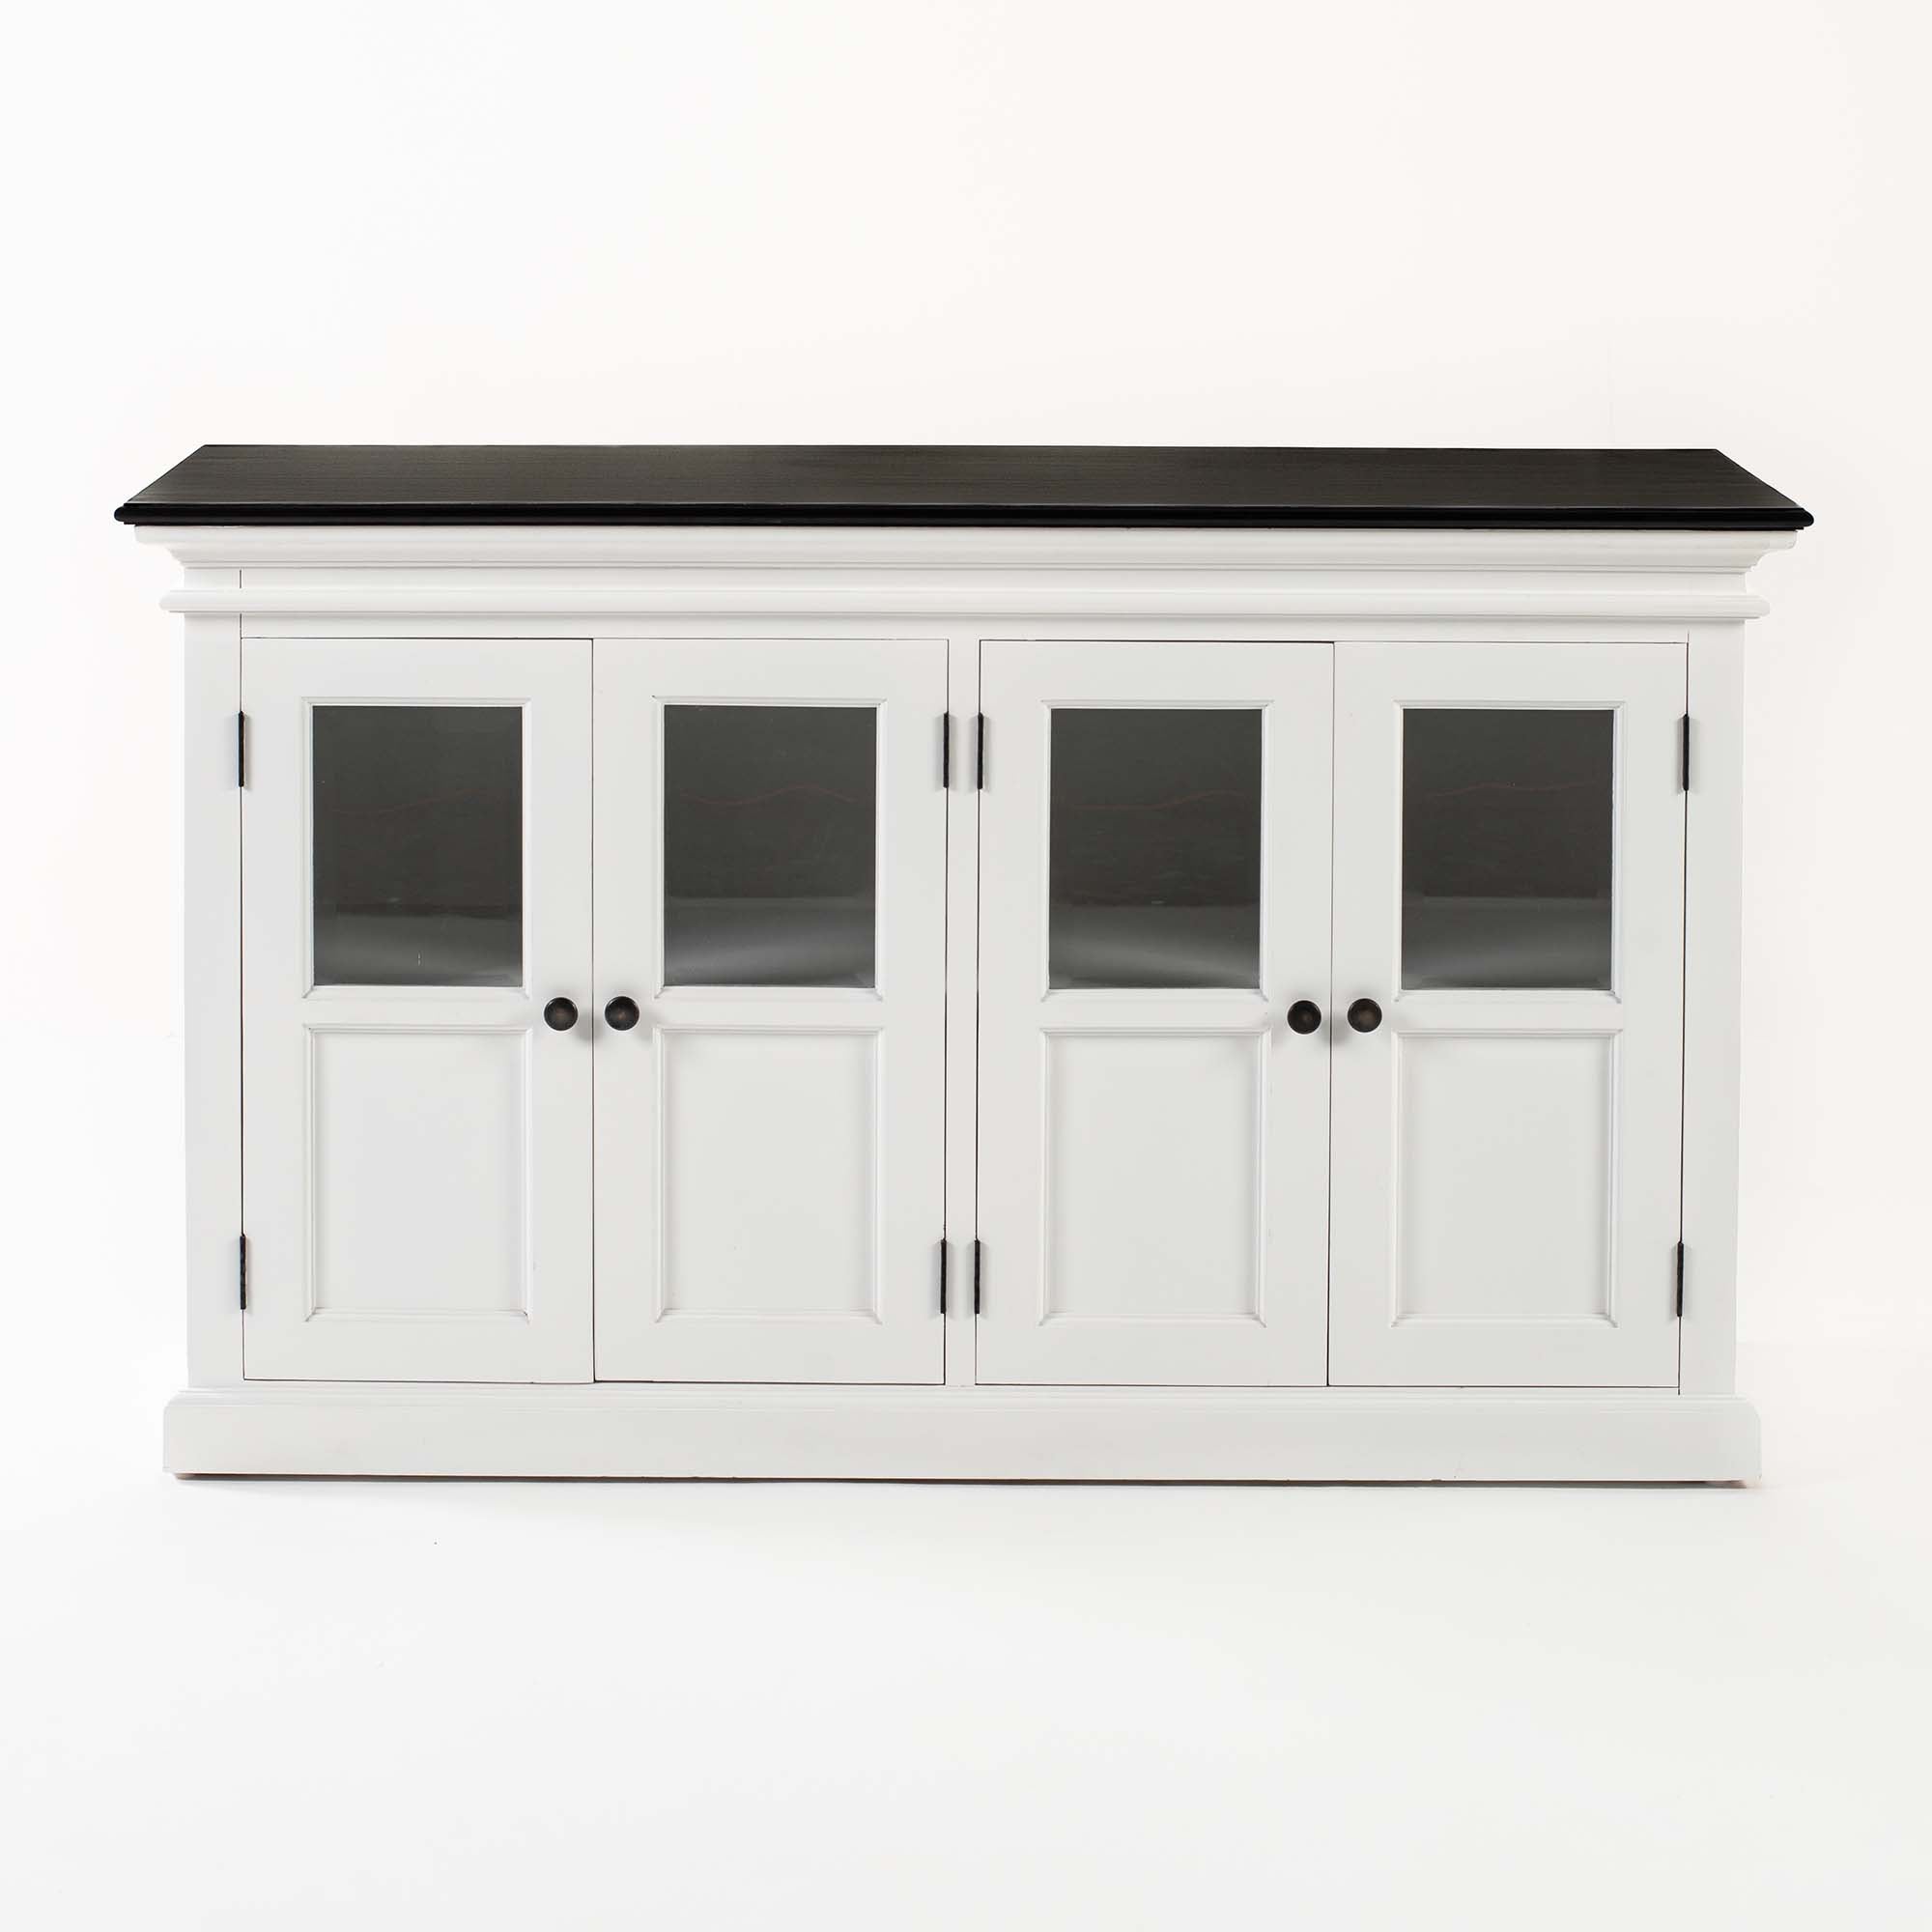 Halifax Contrast Farmhouse White & Black Buffet with 4 Glass Doors